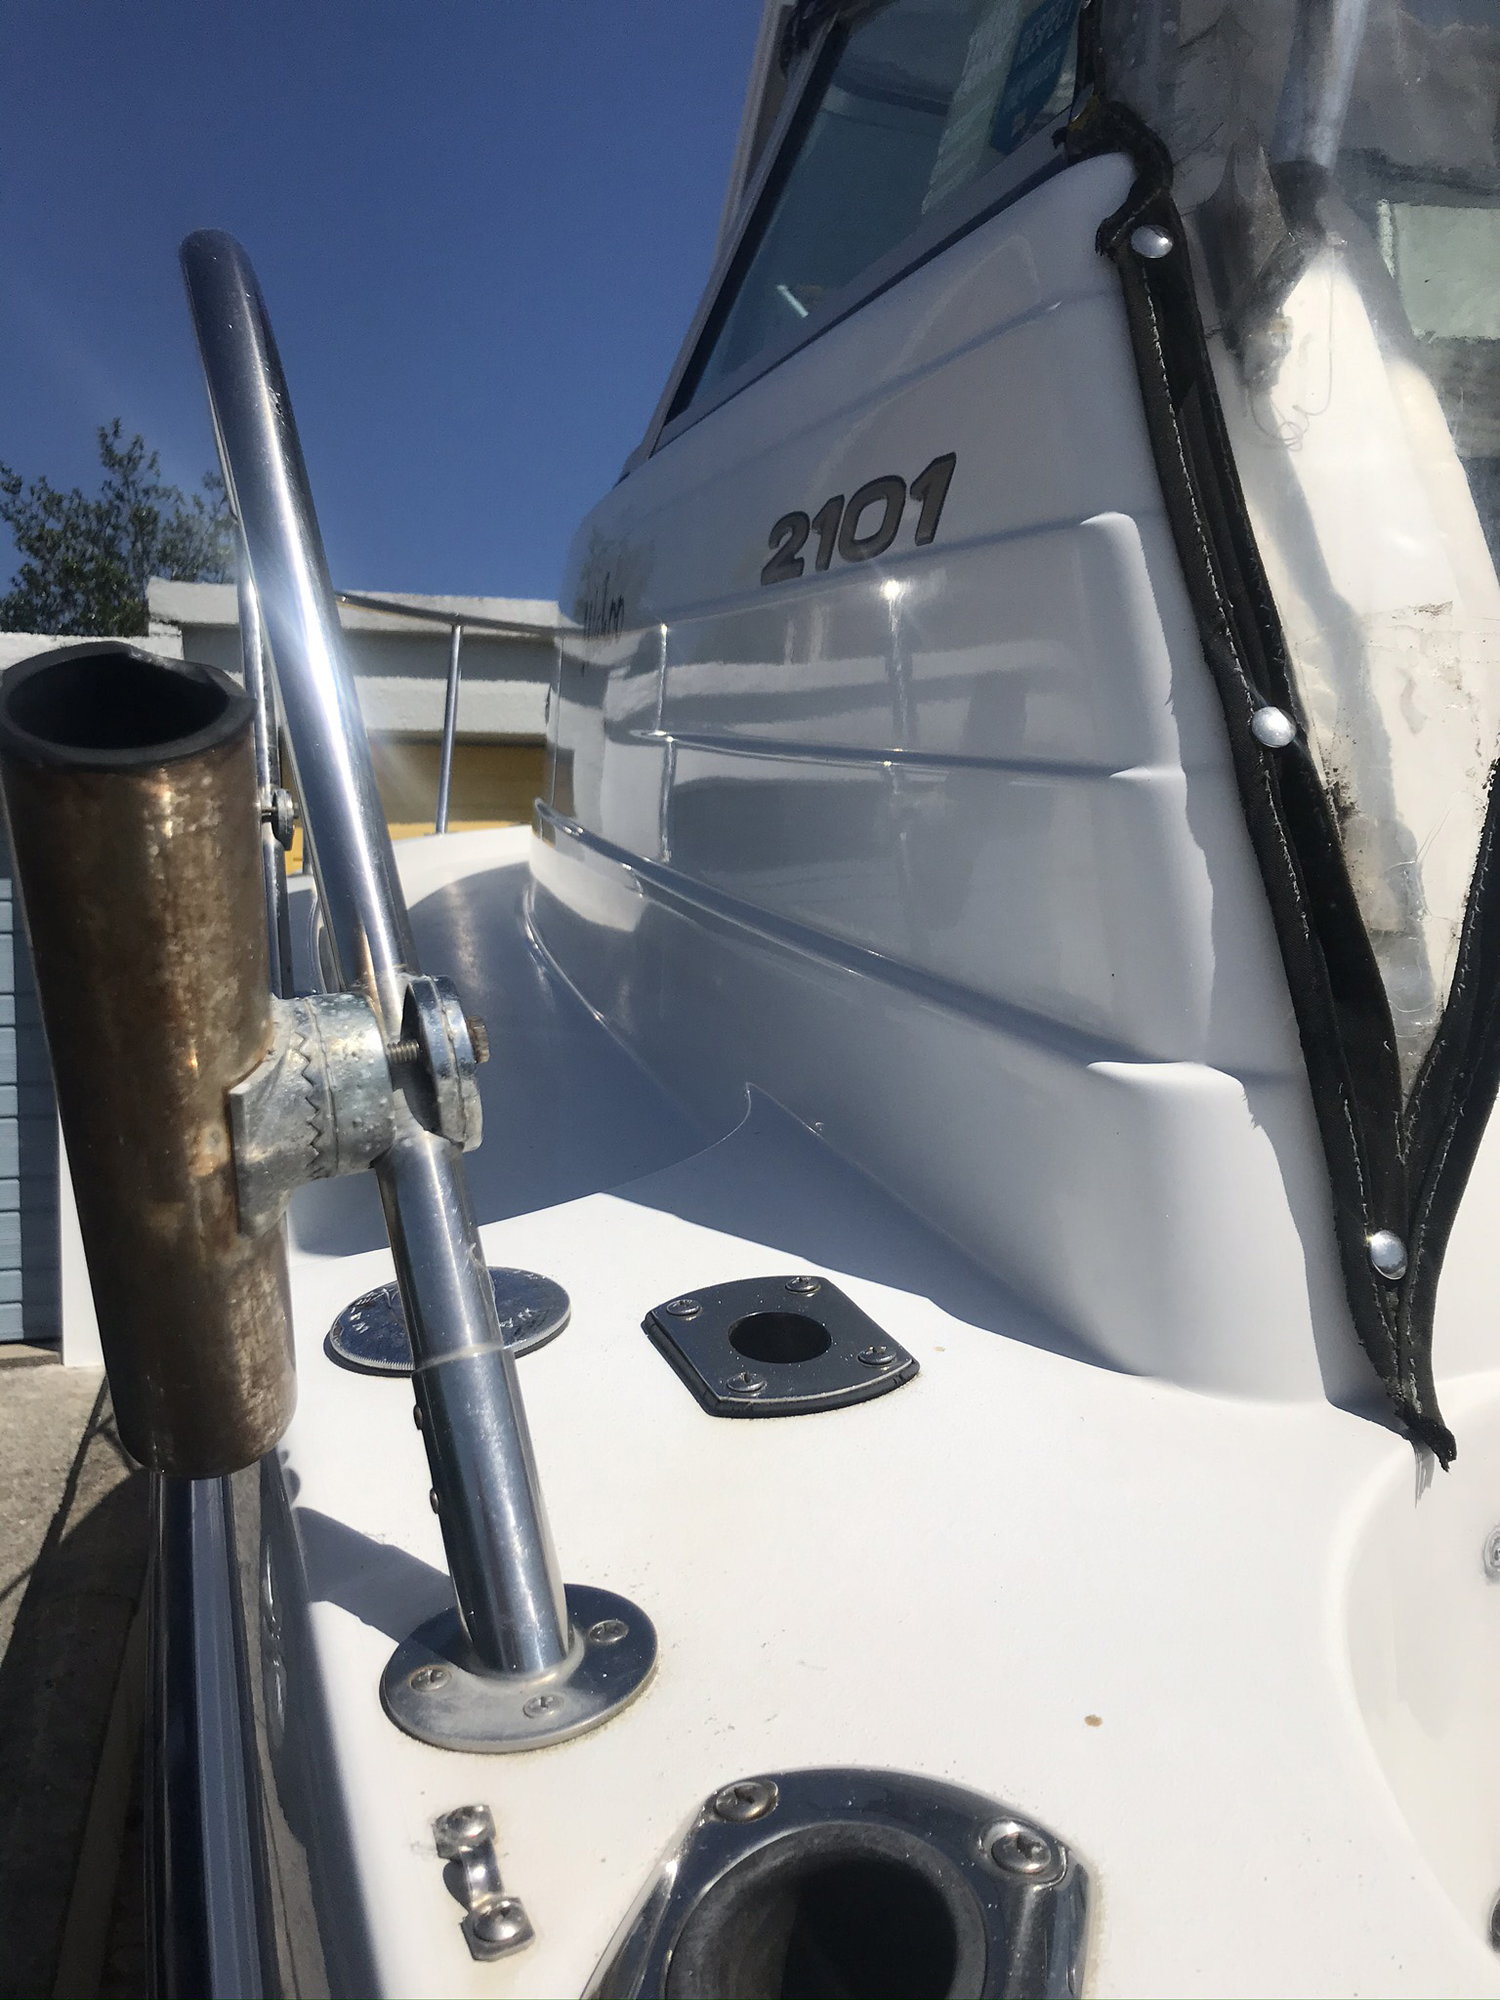 Salt off/away/gone - The Hull Truth - Boating and Fishing Forum